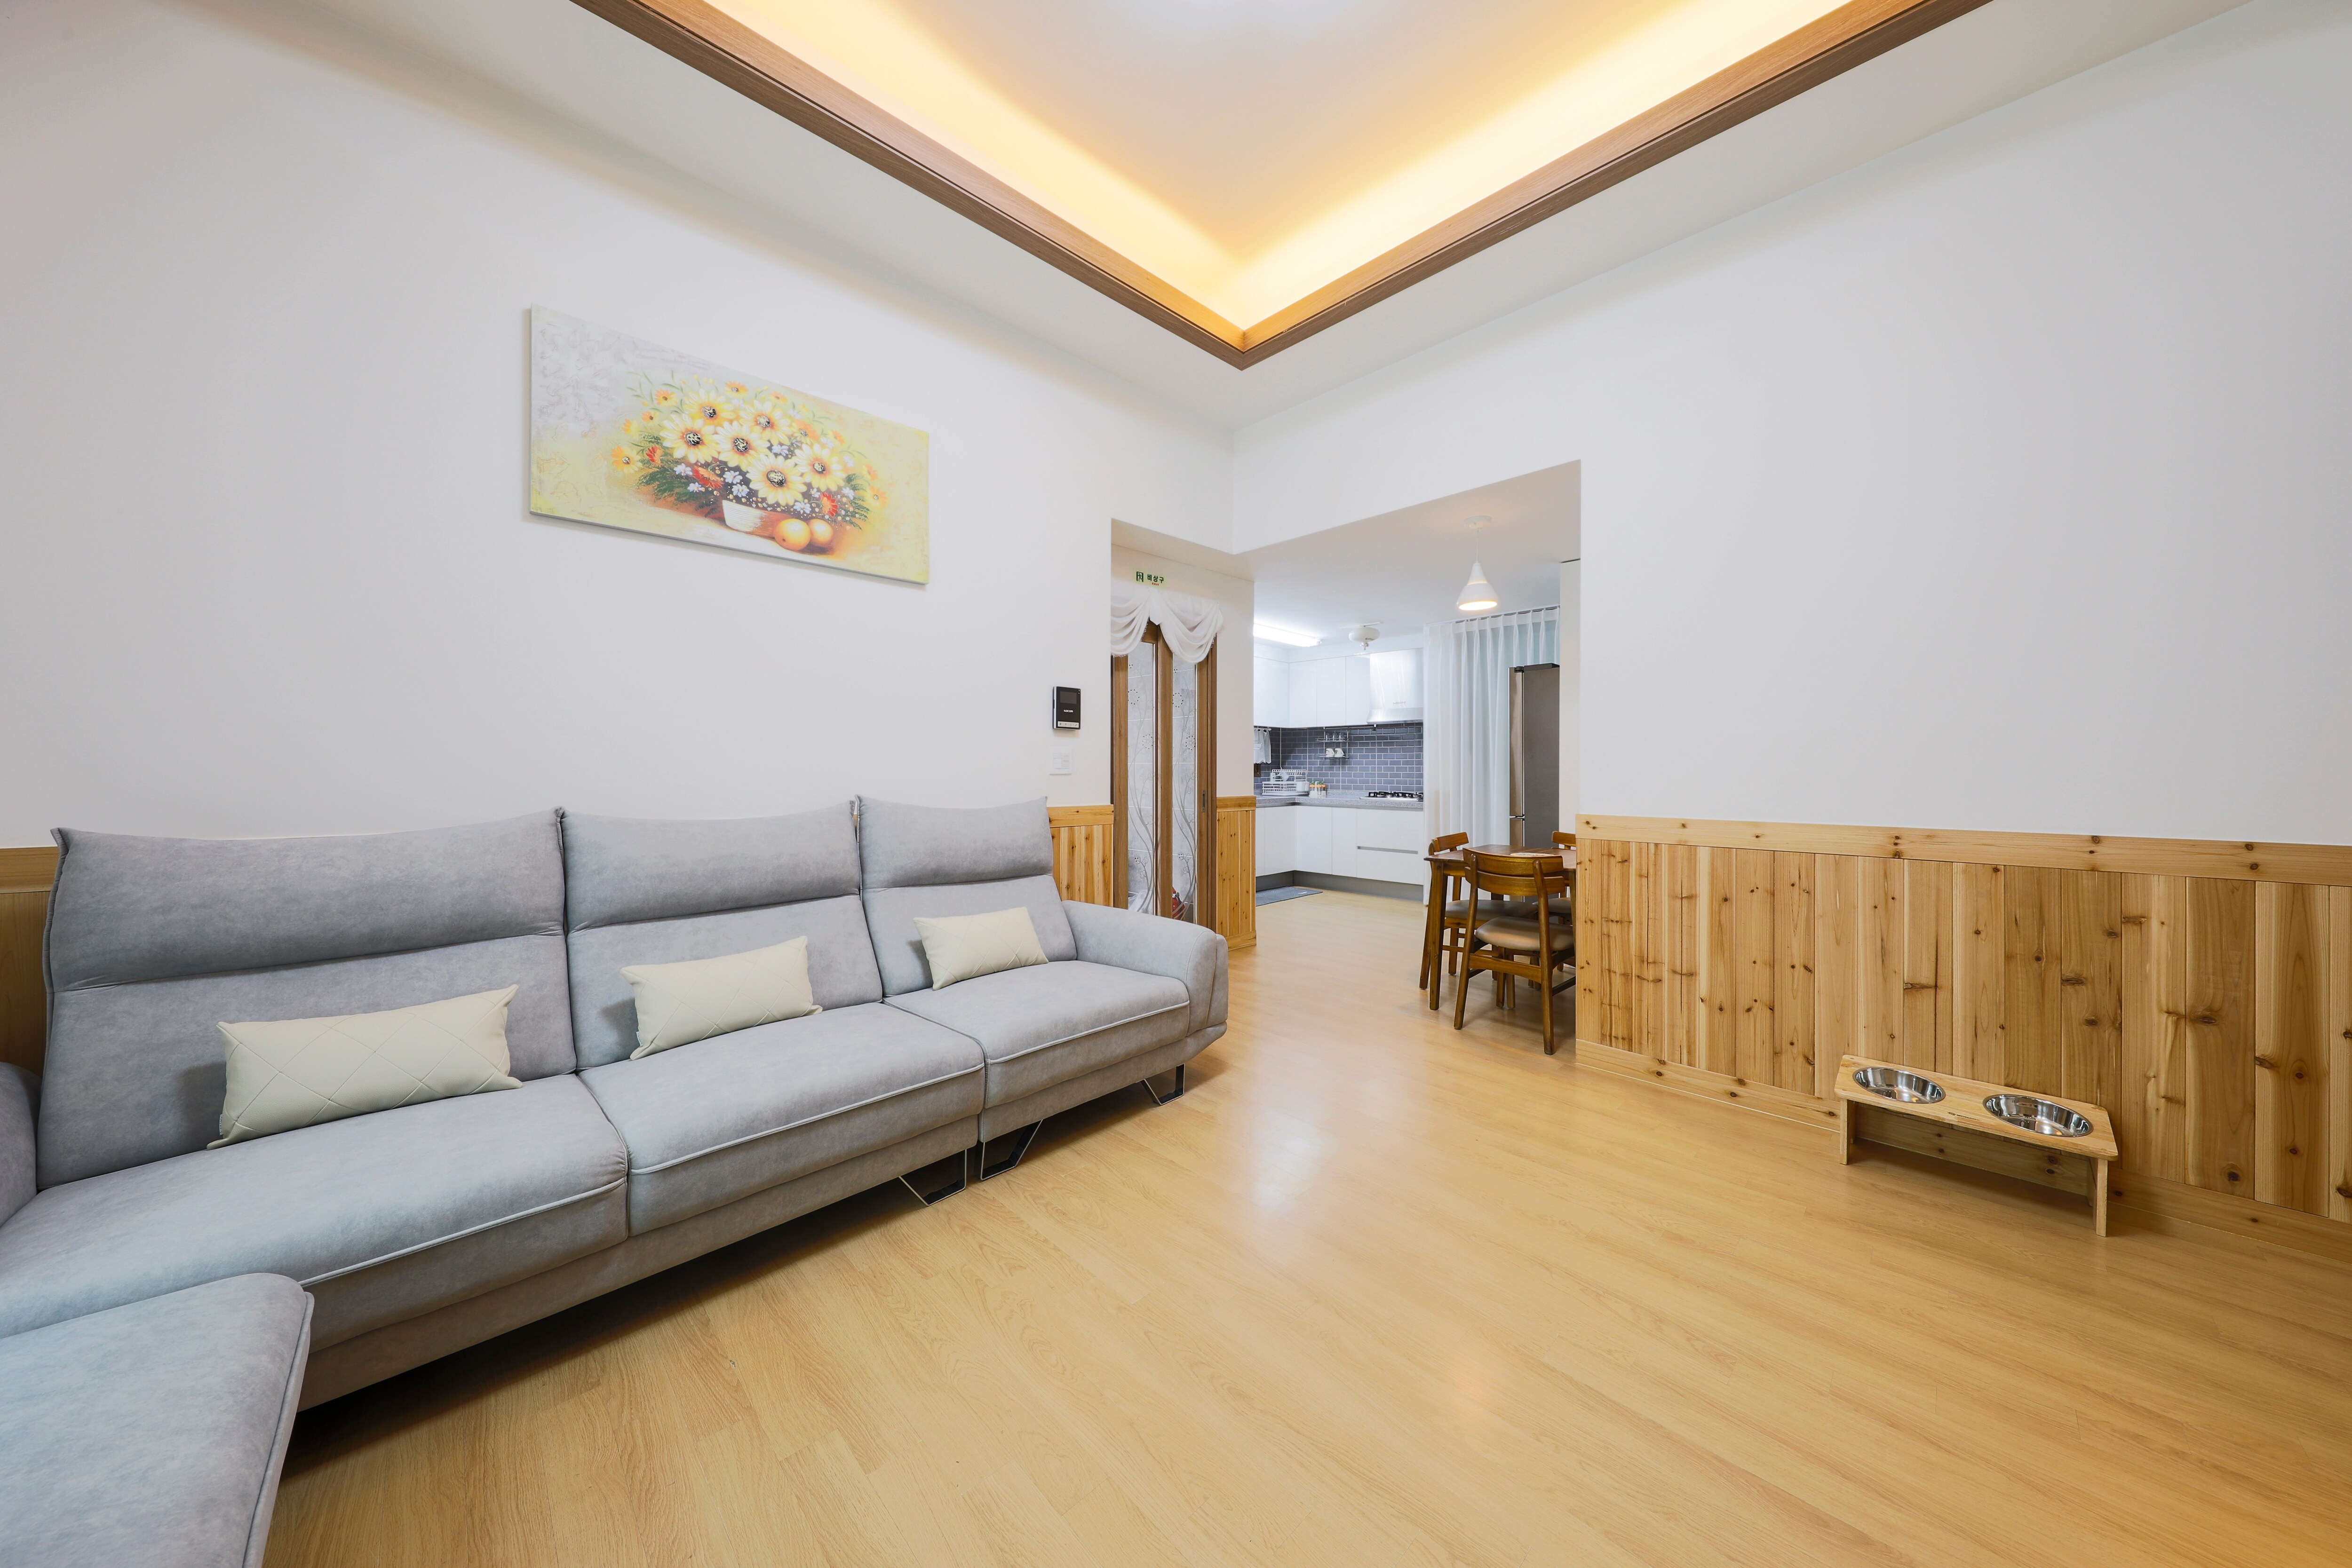 Property Image 1 - Newly remodeled Dog friendly house in Yeoncheon 